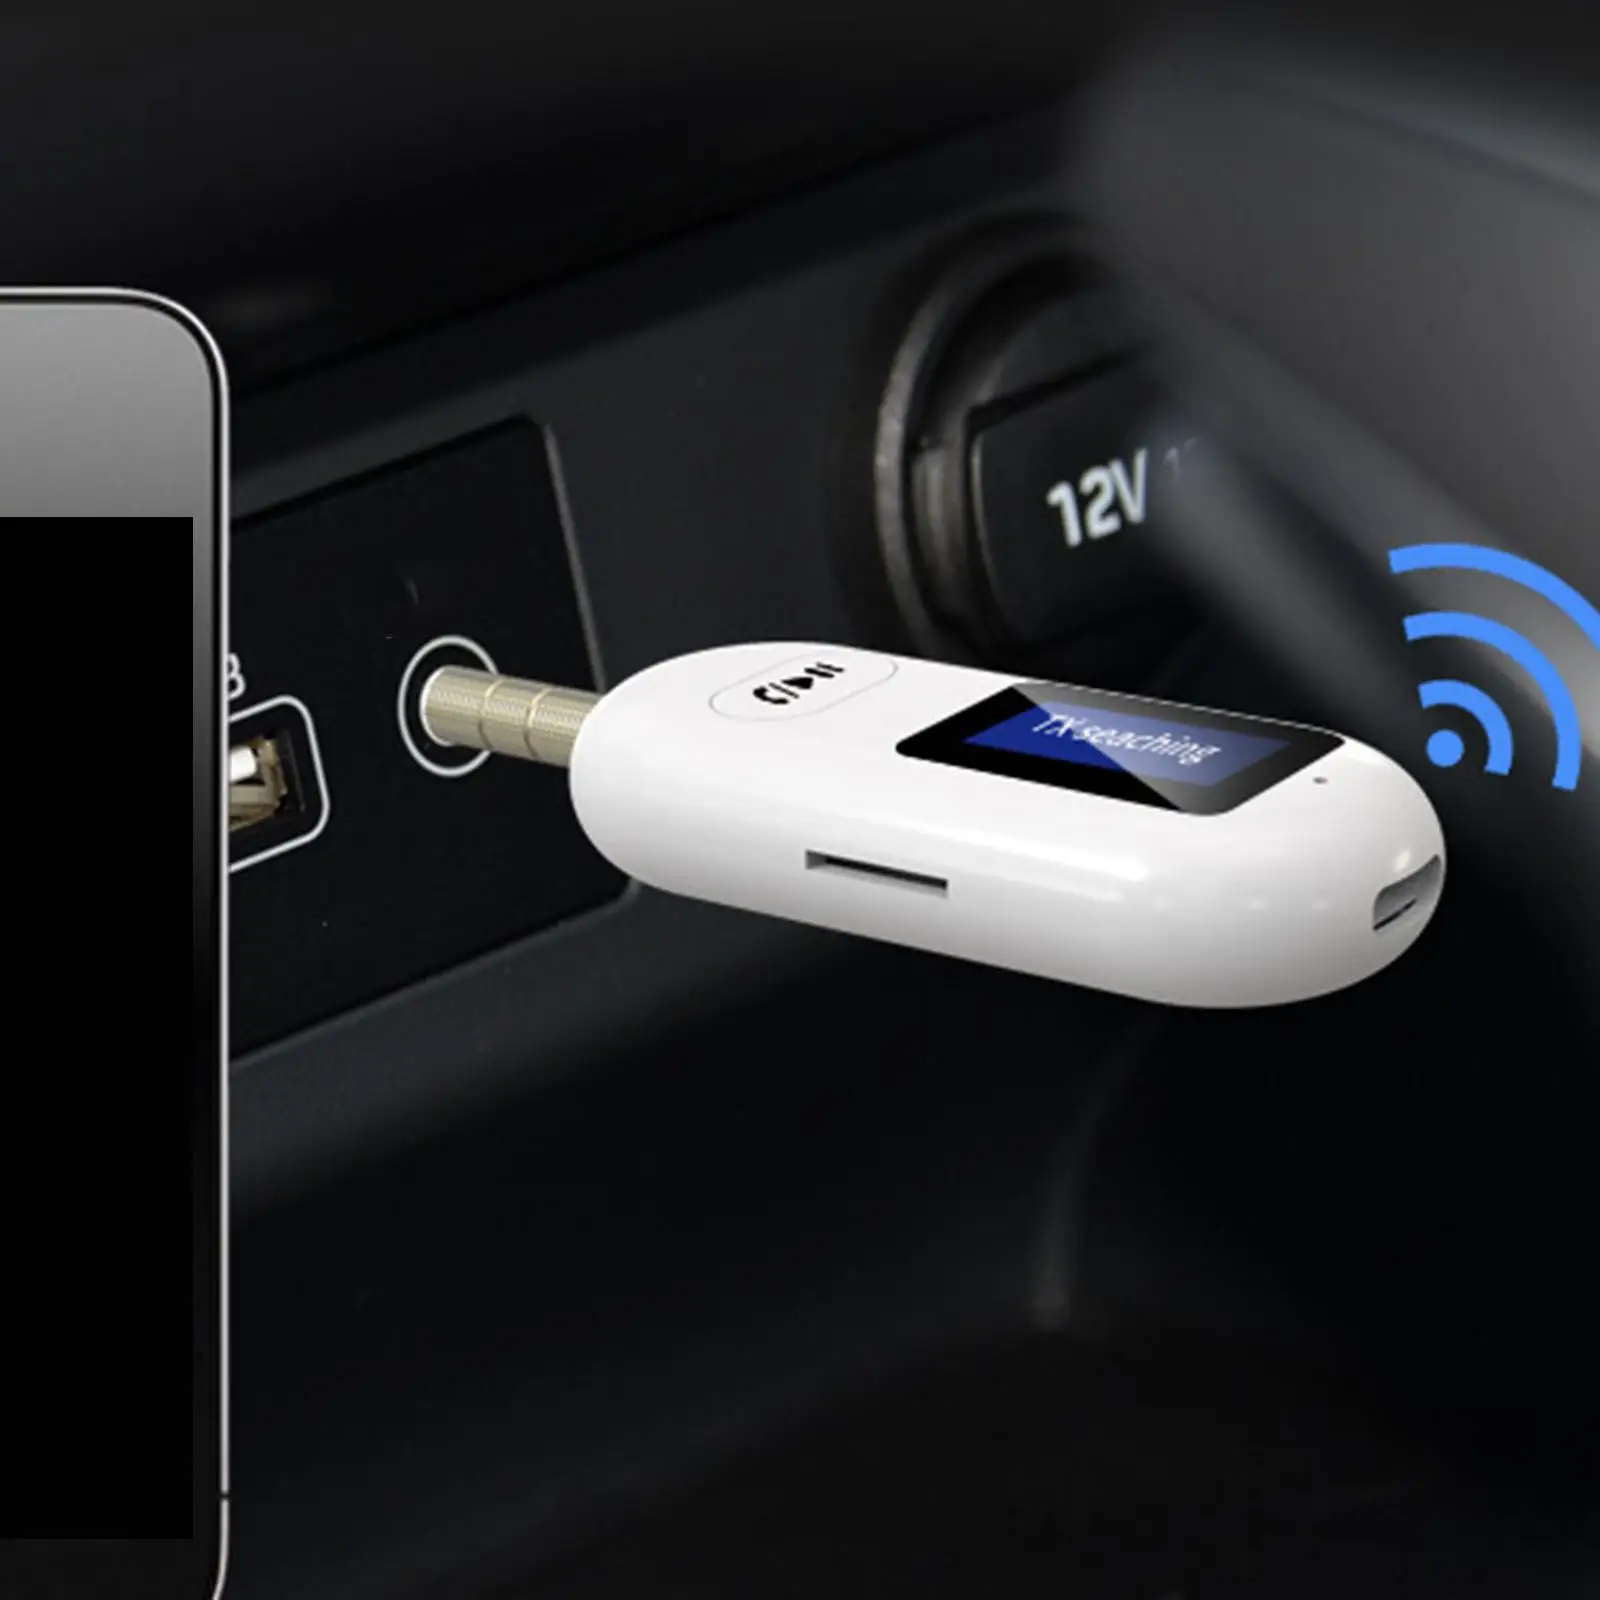 Bluetooth Audio Receiver Transmitter Portable for Home Stereo Headset Wired Headphones Car Stereo System Headphone